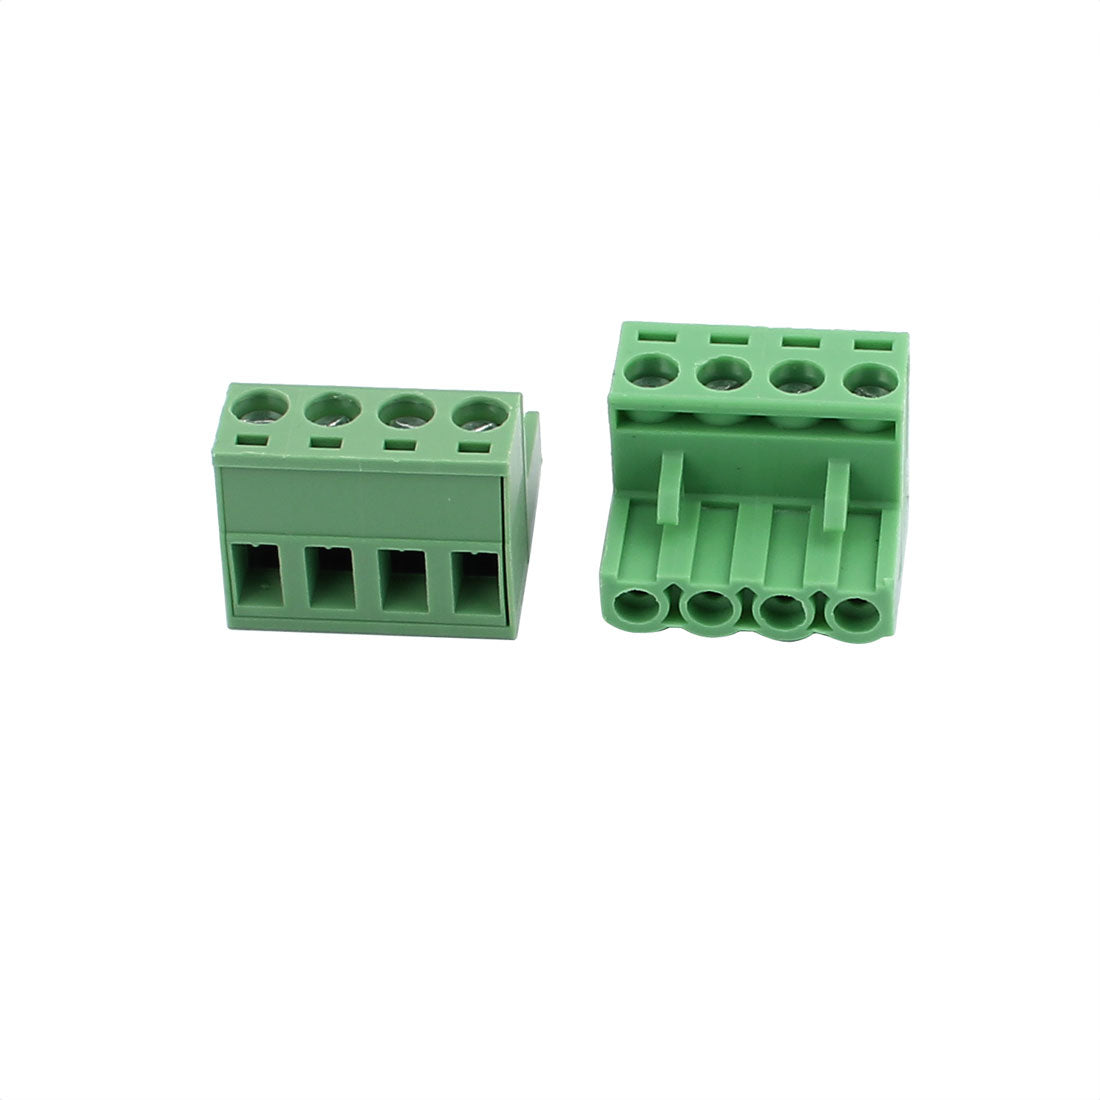 Uxcell Uxcell 50Pcs 300V KF2EDGK 5.08mm Pitch 4-Pin PCB Screw Terminal Block Connector